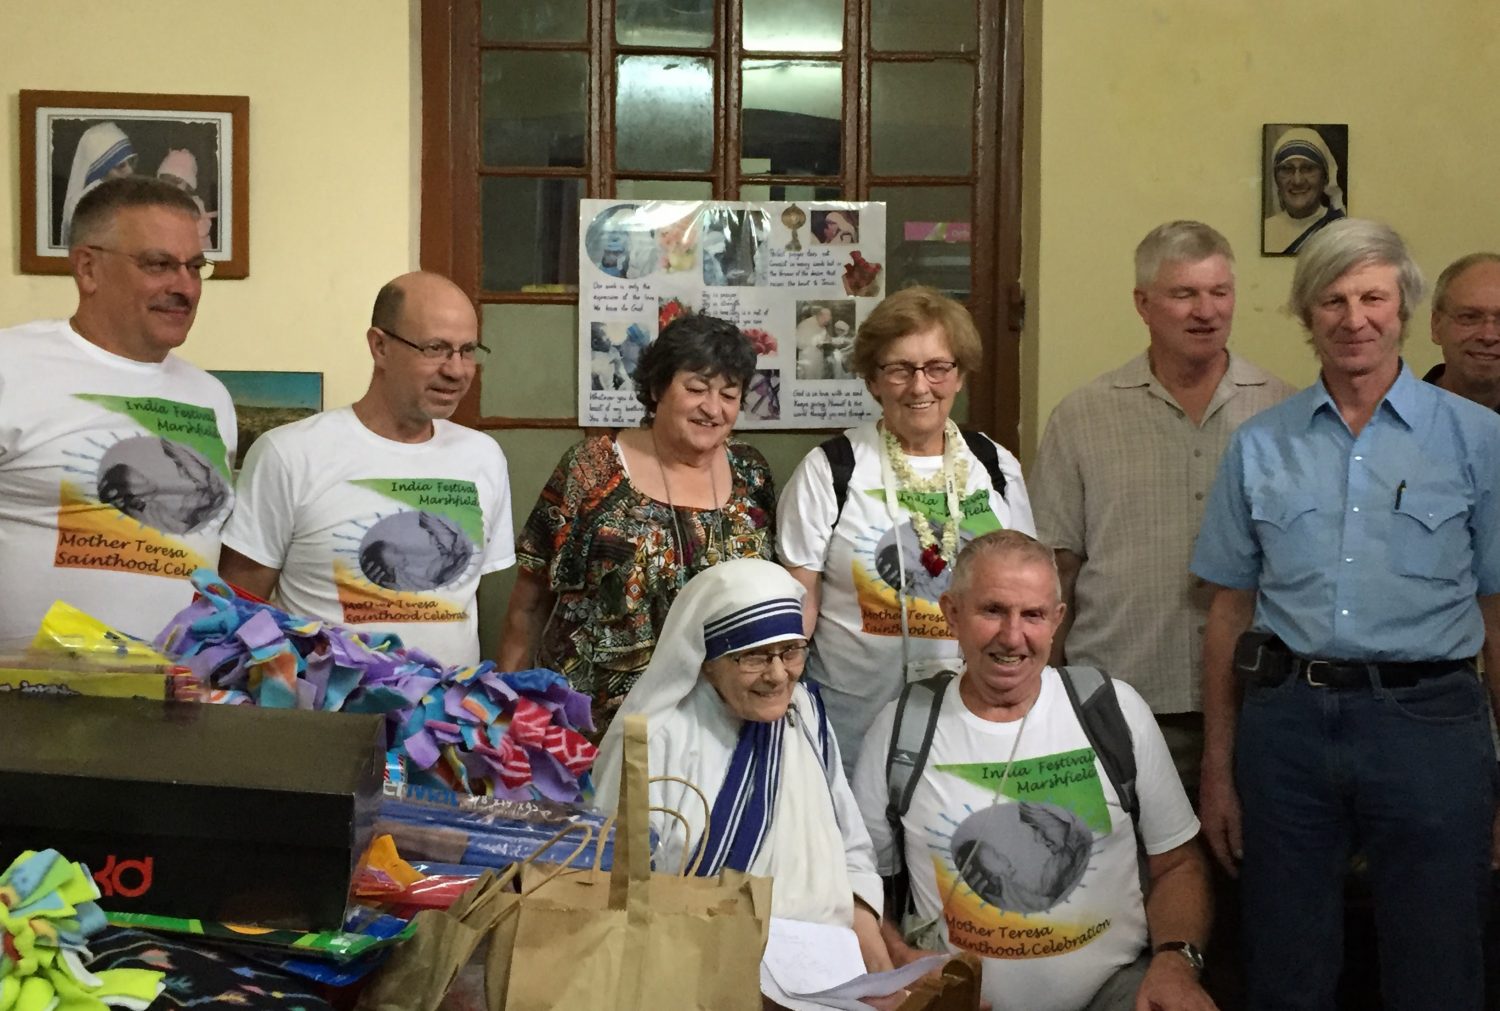 India Mission Joy volunteers present money and school supplies to the Mother Teresa Orphange in Calcutta, India.